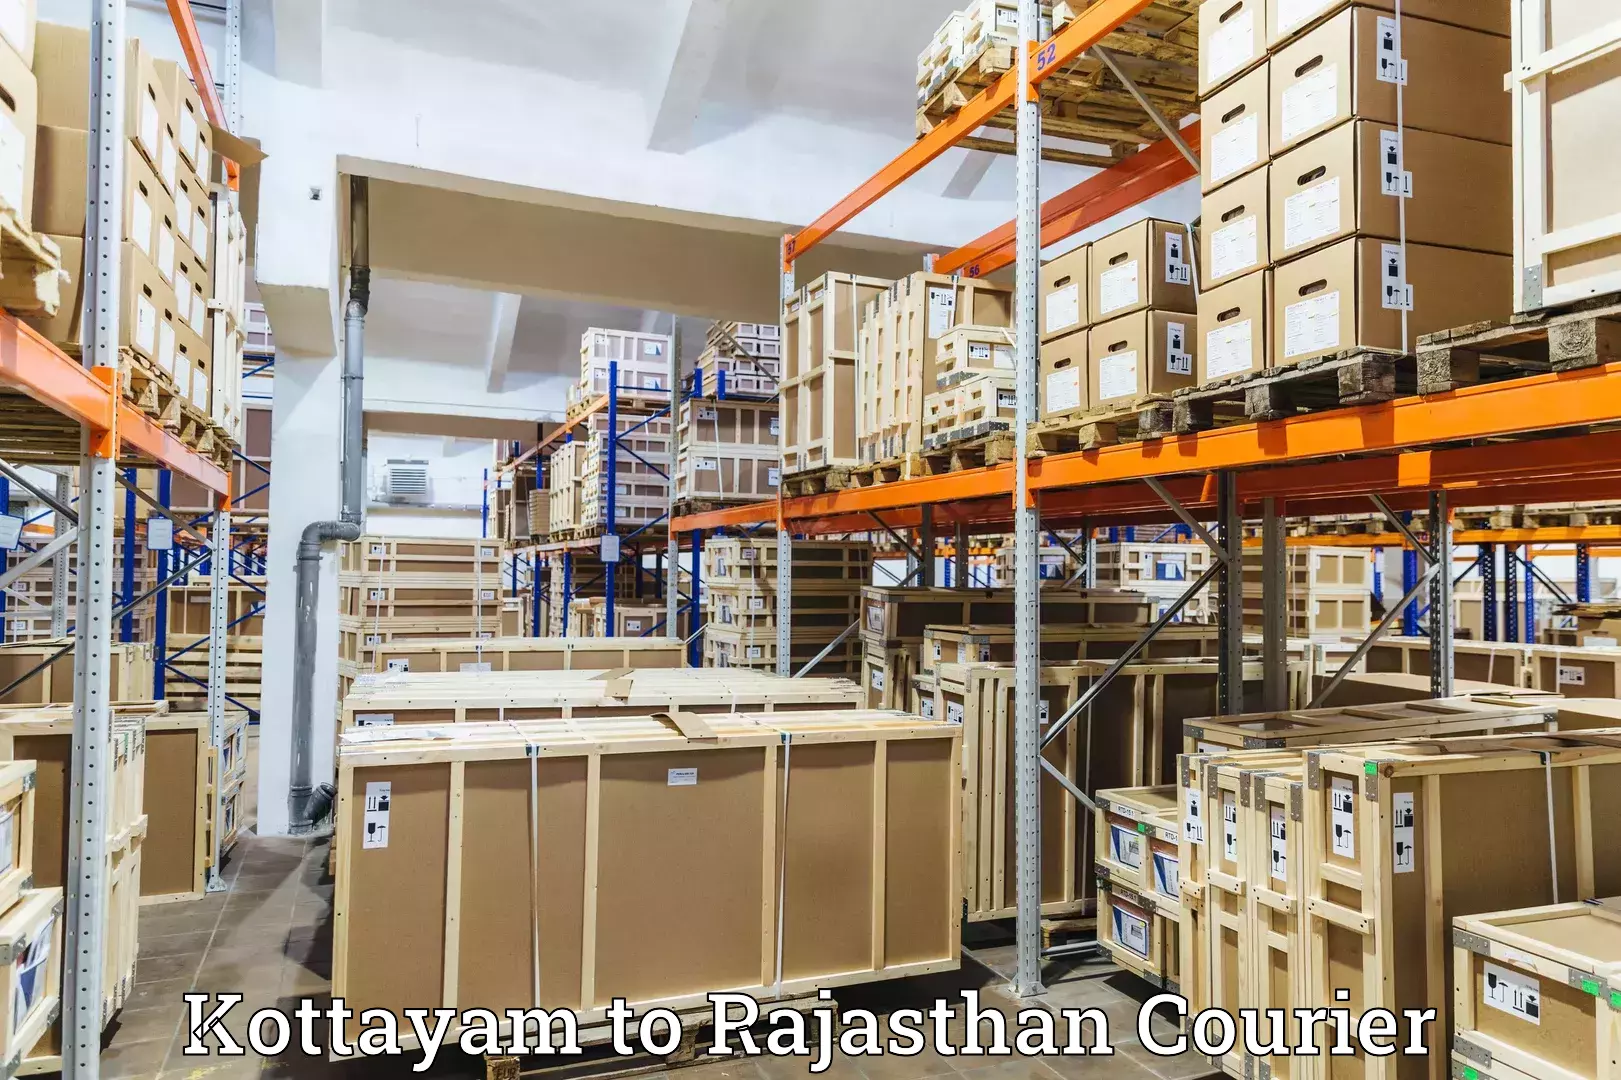 Express delivery network Kottayam to Rajasthan